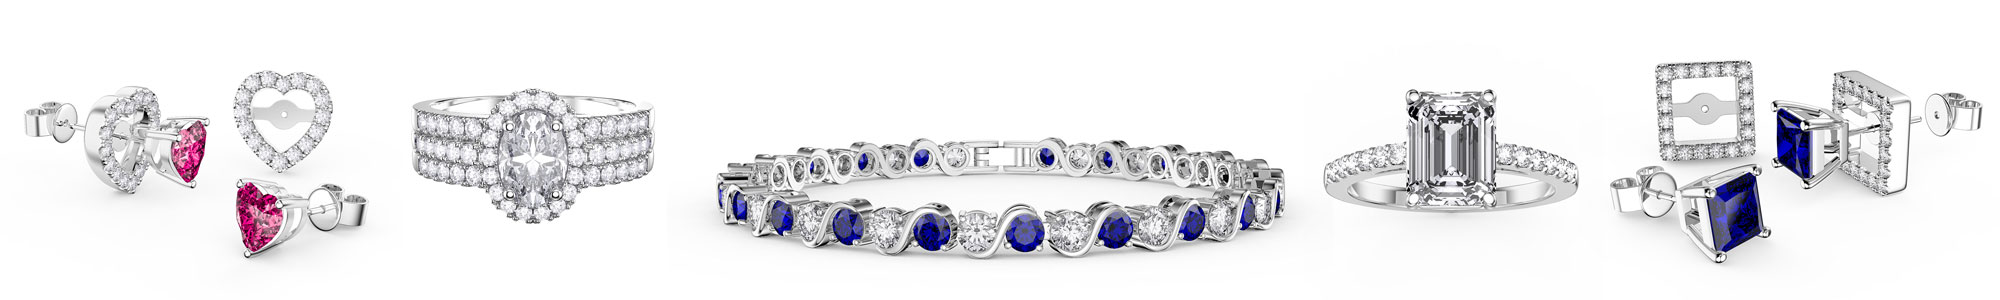 Sapphire Jewellery - Wide Selection of Sapphire Earrings, Studs, Drops, Pendants, Engagement Rings, Bracelets and Necklaces